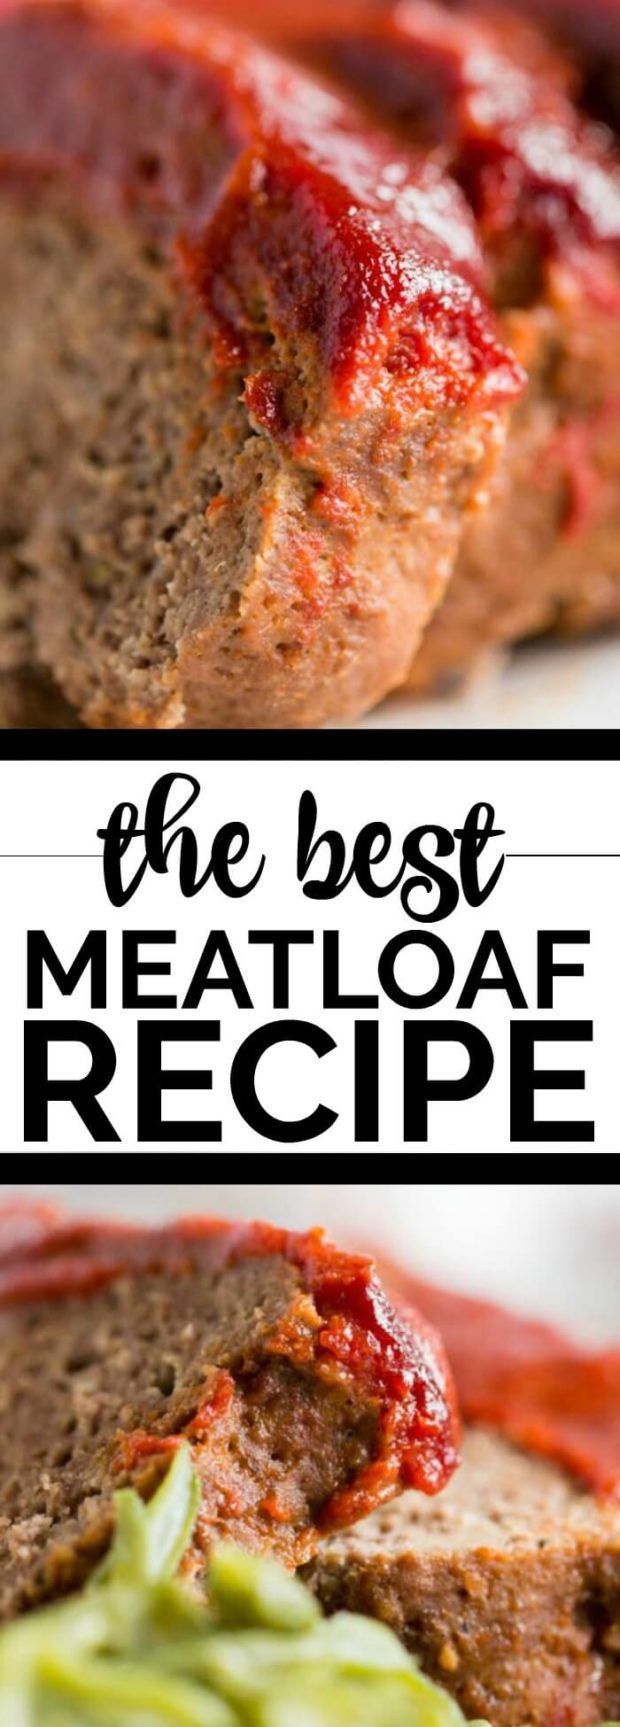 The Best Meatloaf Recipe via @spaceshipslb -   21 southern meatloaf recipes
 ideas